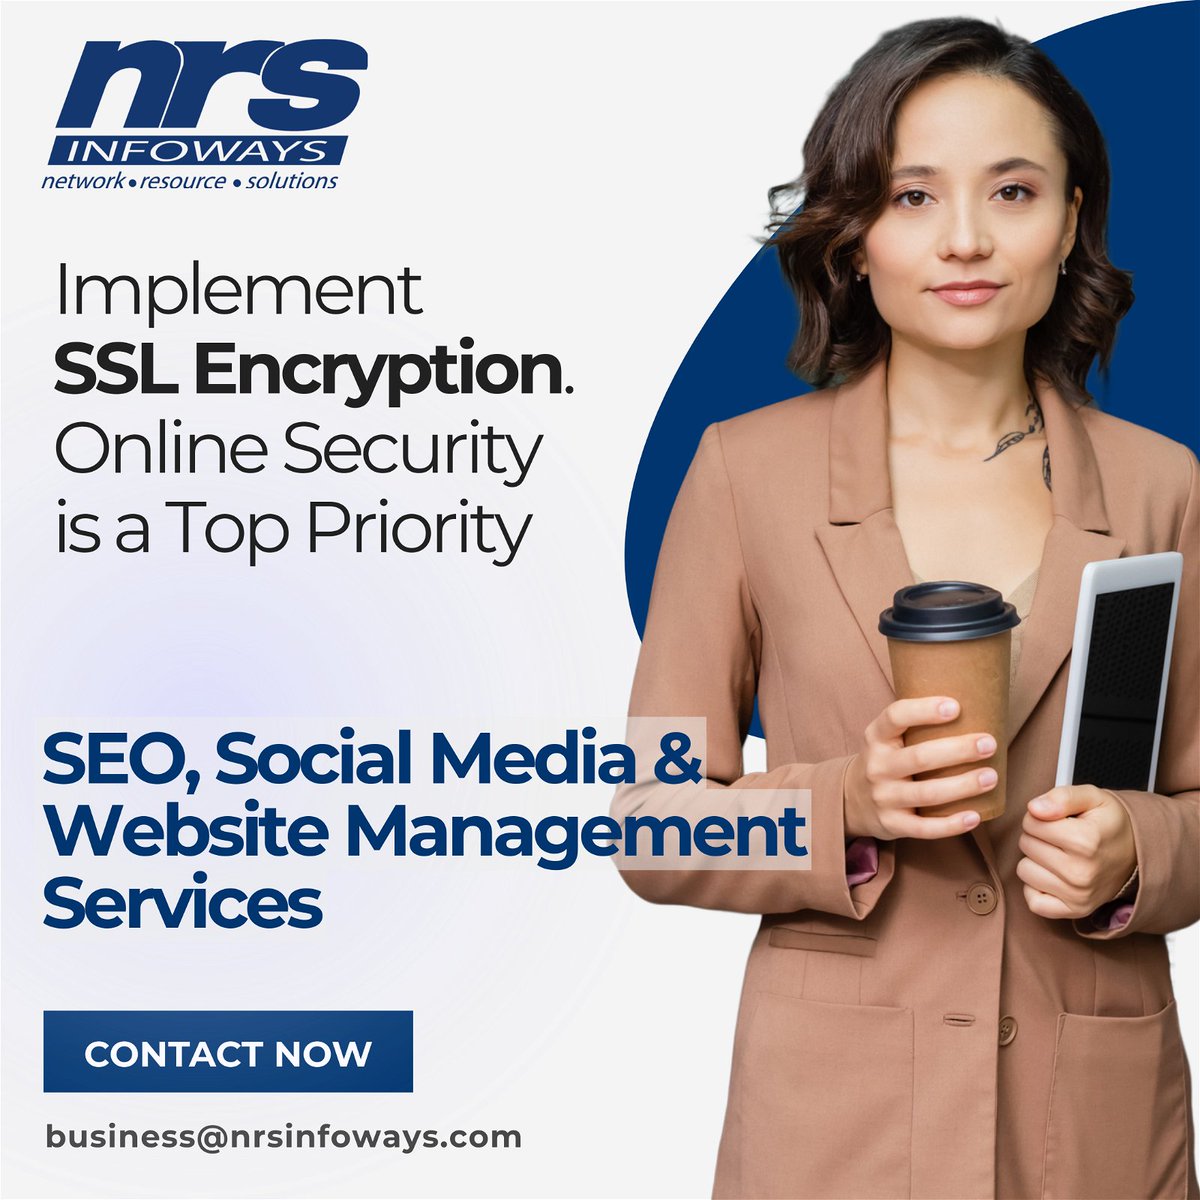 Implement SSL Encryption. Online Security is a Top Priority

Google prioritises secure websites, and having an SSL certificate is not only a security measure but also an SEO factor.

We can help
Lets discuss business@nrsinfoways.com
#ssl #websecurity #securewebsite #nrsinfoways